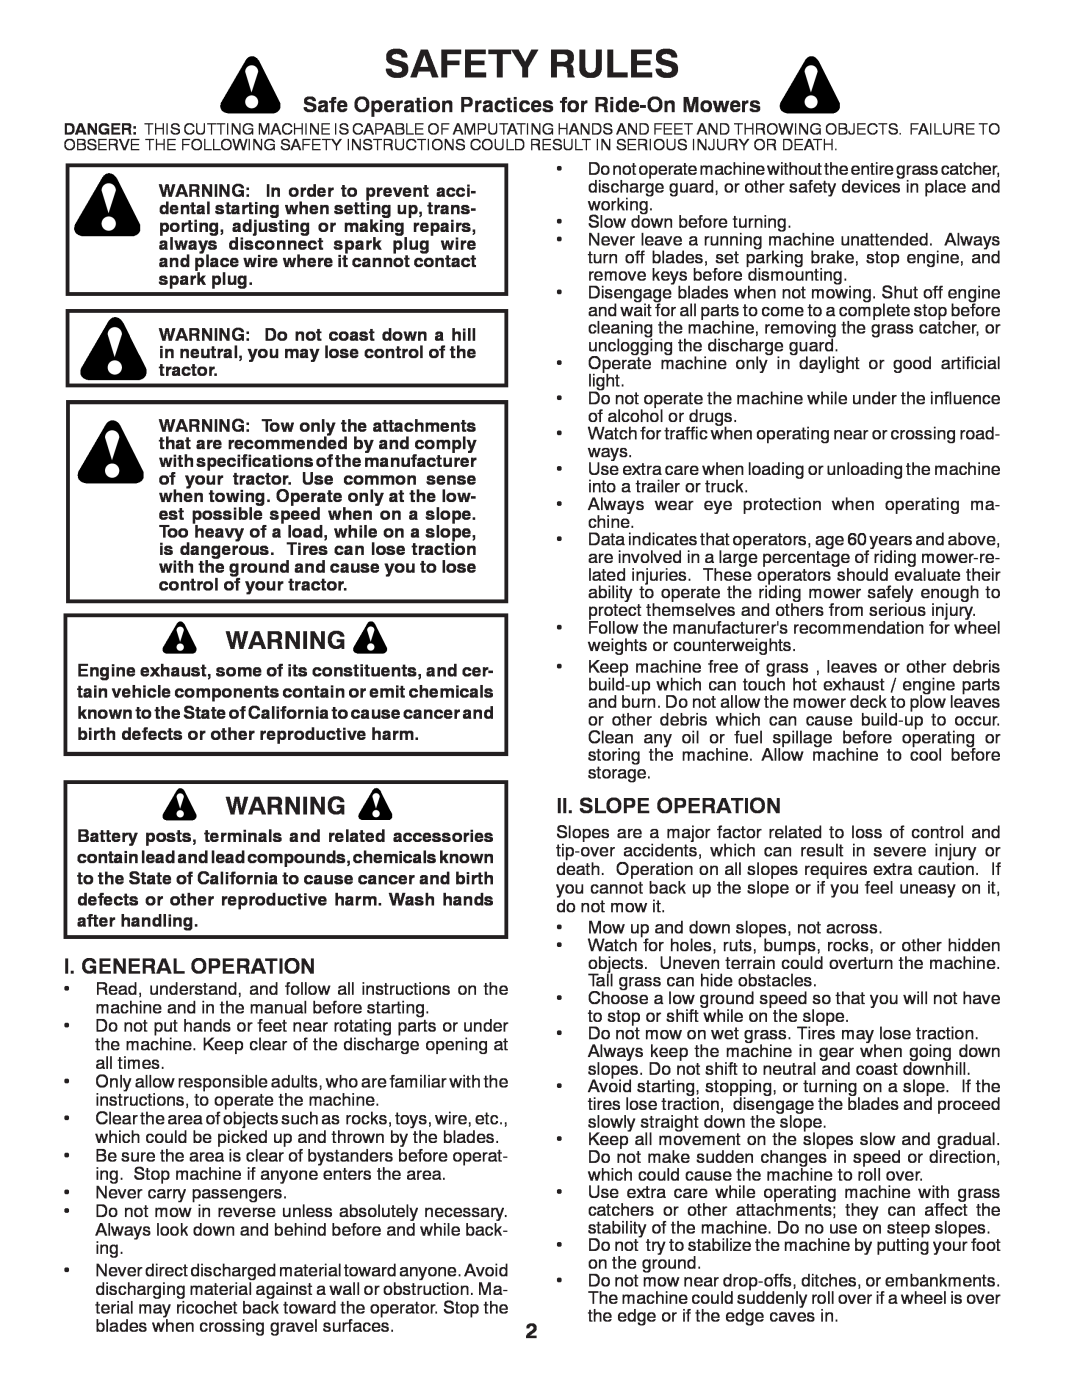 Poulan 96042002400 Safety Rules, Safe Operation Practices for Ride-On Mowers, I. General Operation, Ii. Slope Operation 